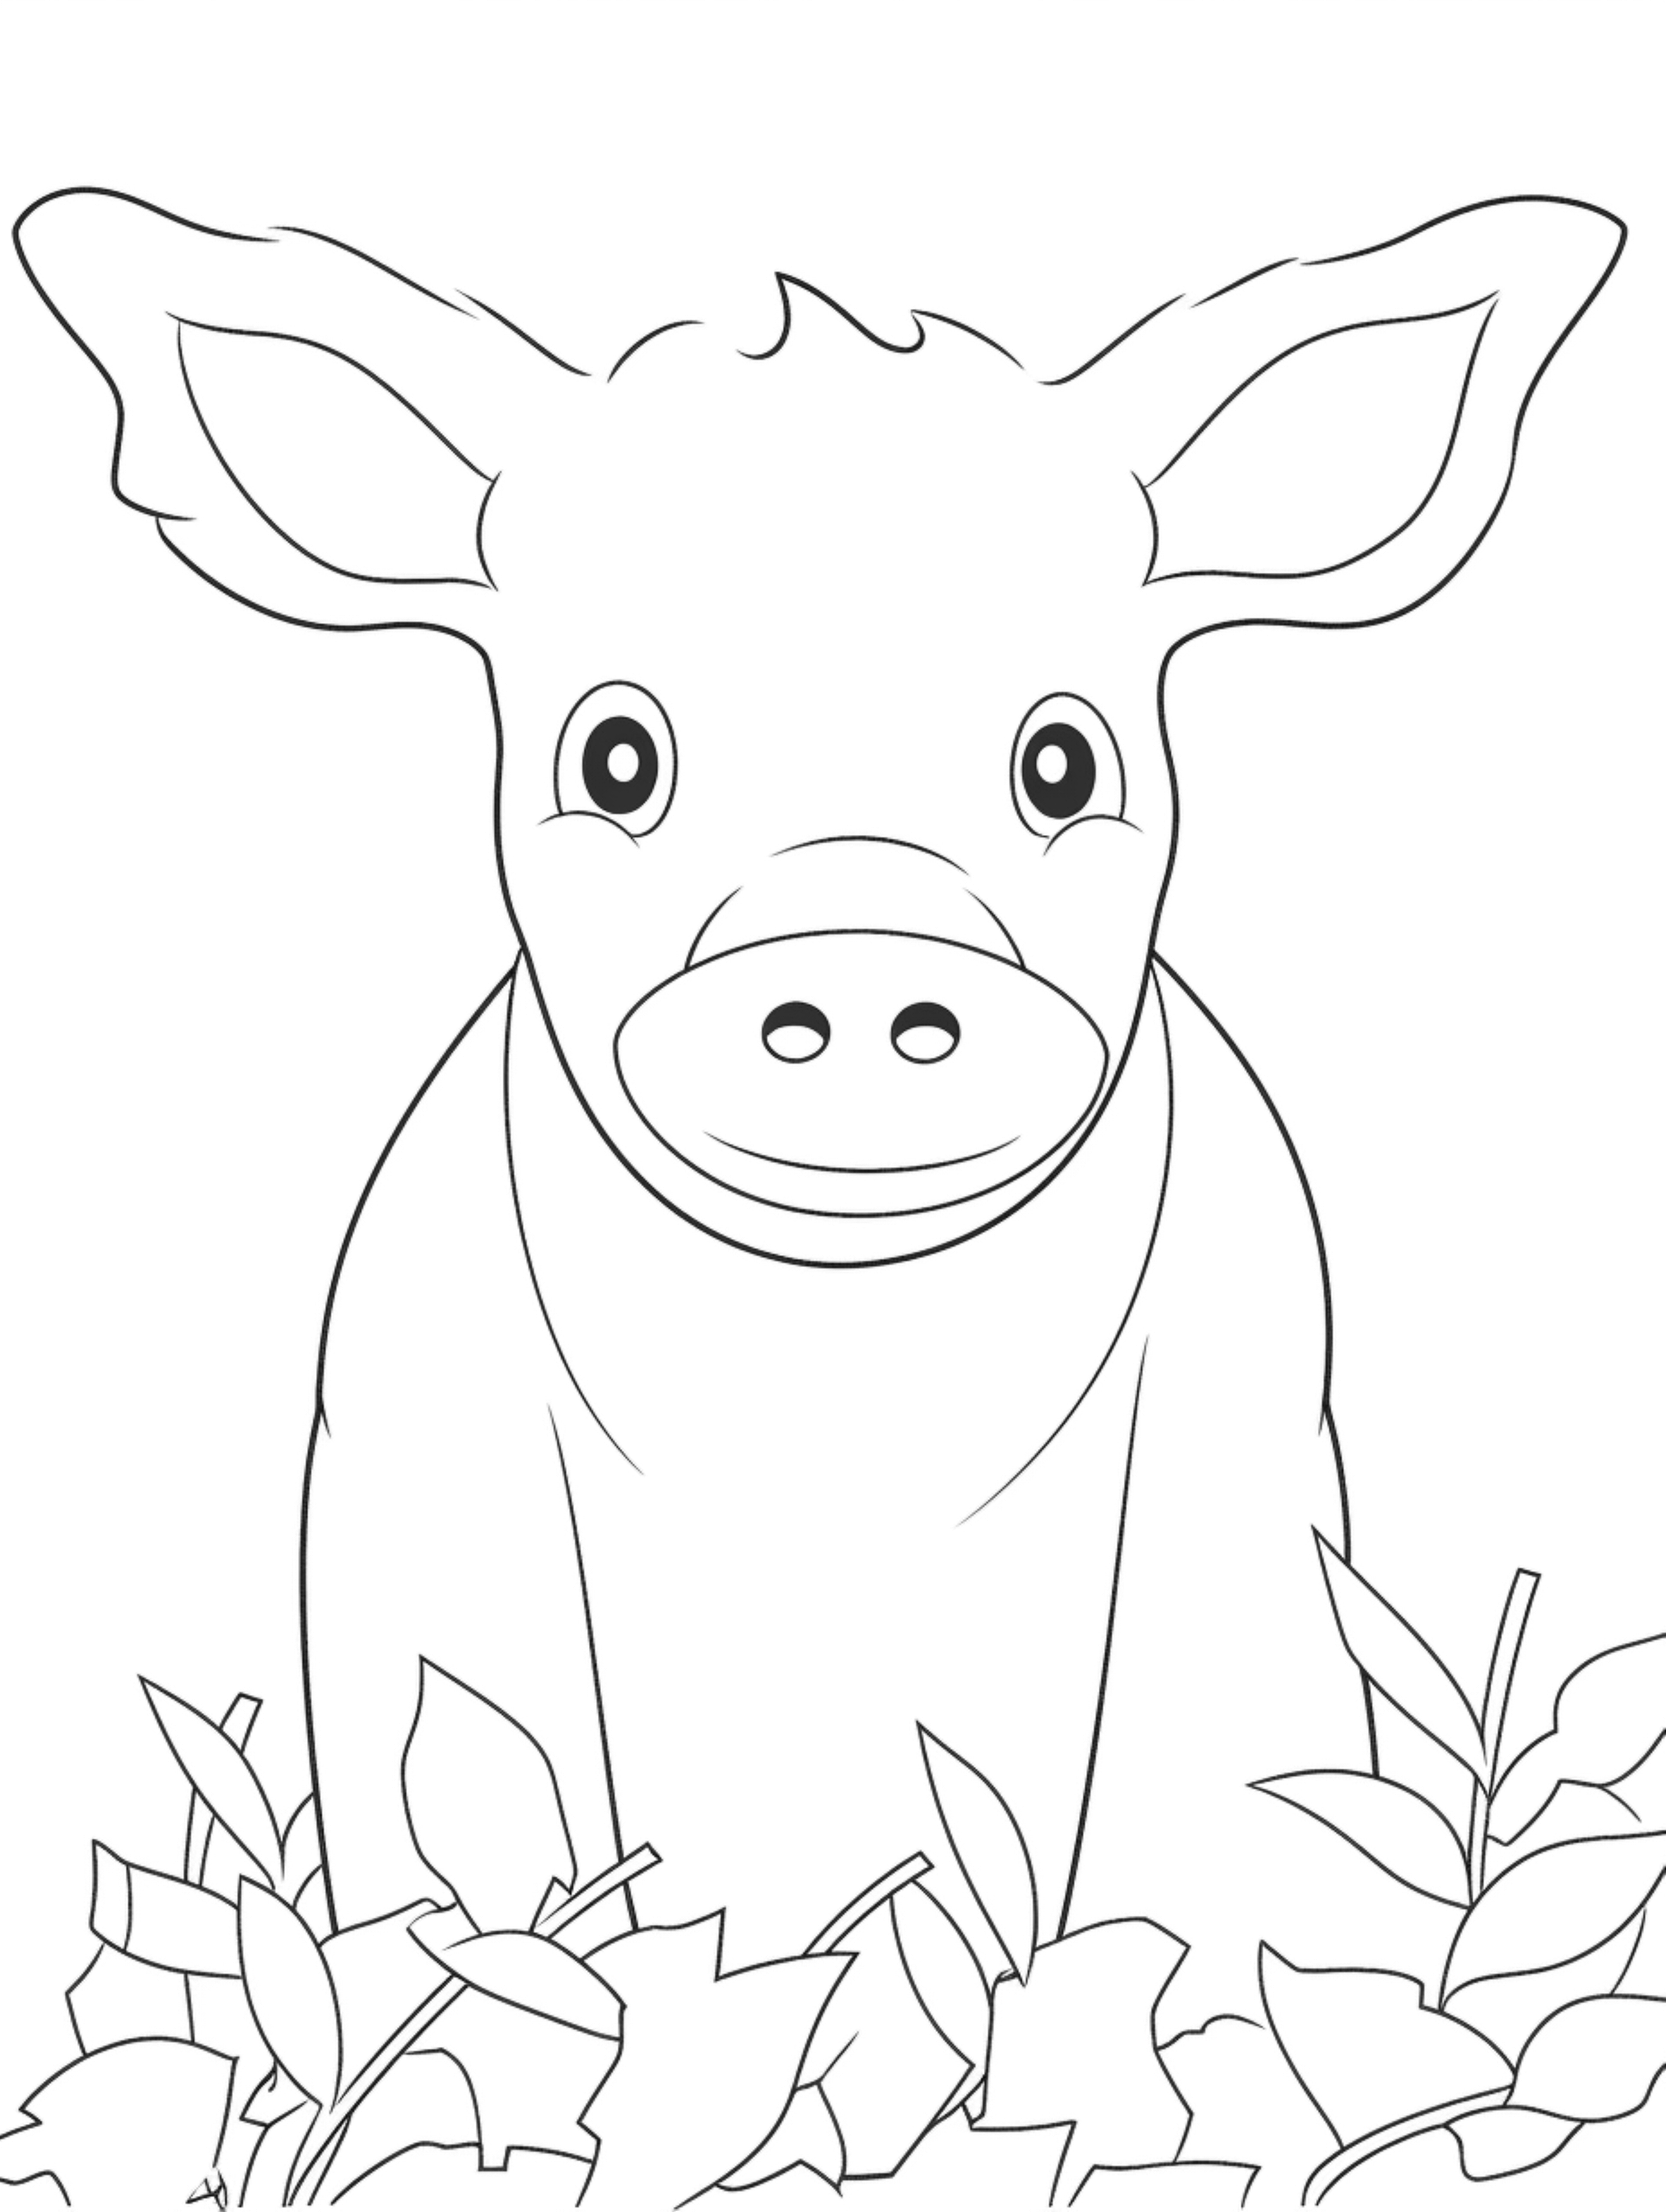 cow face coloring pages